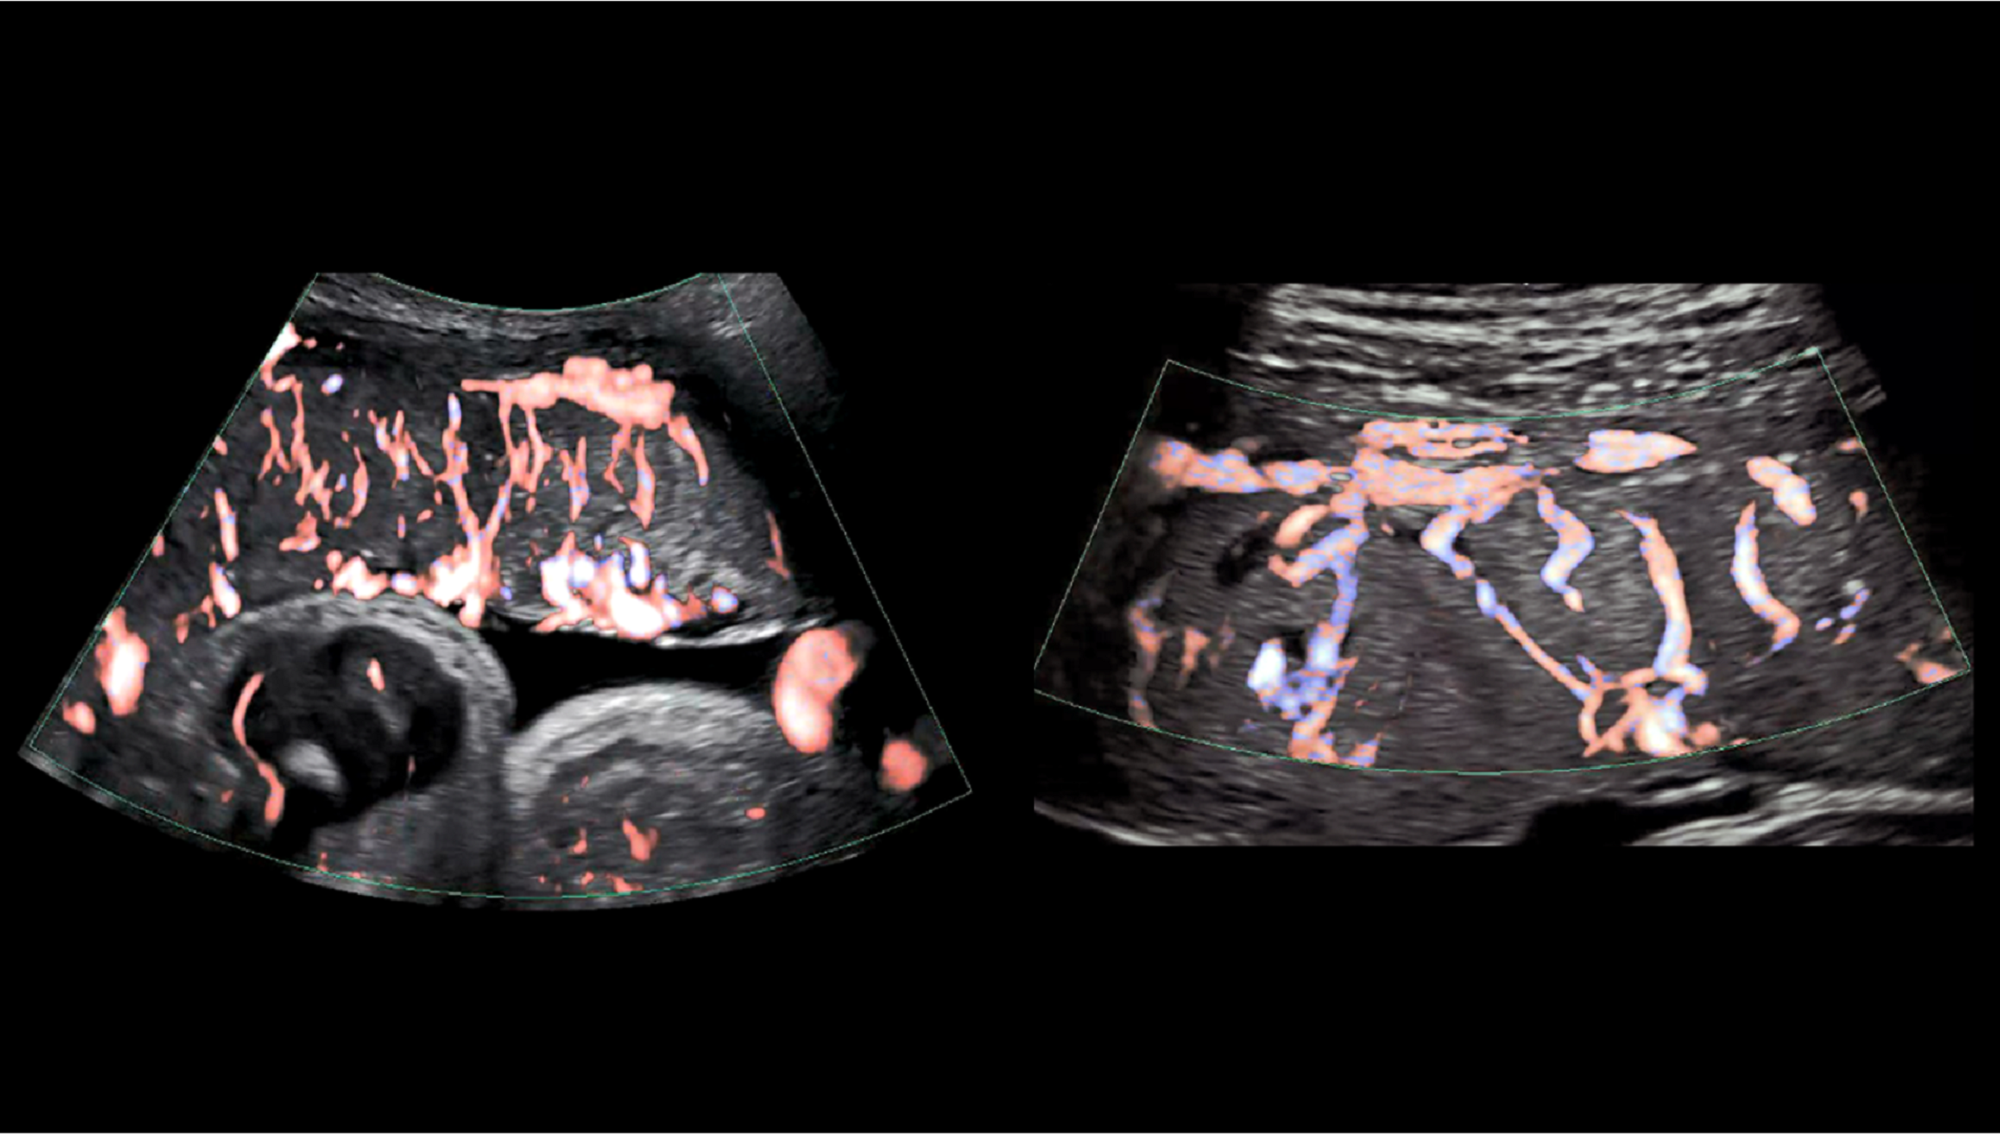 Placenta well being and analysis is a brand new precedence for medical doctors